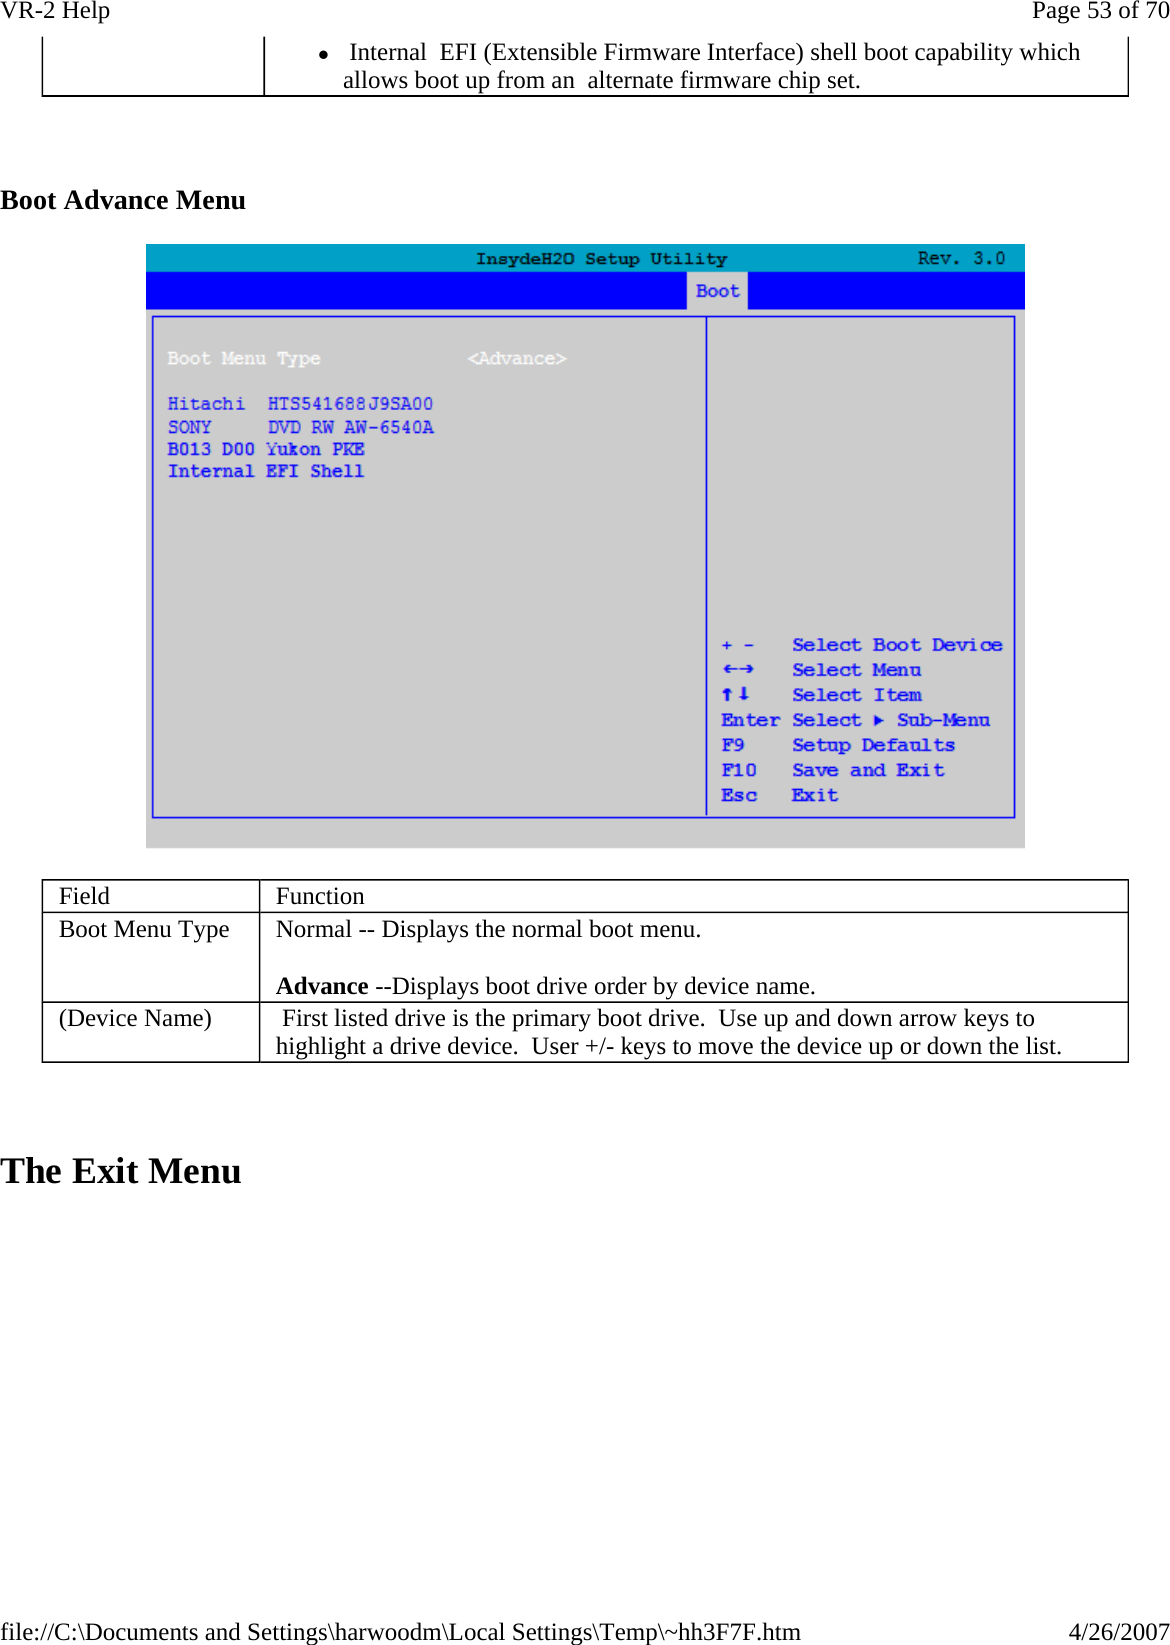   Boot Advance Menu    The Exit Menu z Internal  EFI (Extensible Firmware Interface) shell boot capability which allows boot up from an  alternate firmware chip set. Field  Function Boot Menu Type  Normal -- Displays the normal boot menu. Advance --Displays boot drive order by device name. (Device Name)   First listed drive is the primary boot drive.  Use up and down arrow keys to highlight a drive device.  User +/- keys to move the device up or down the list. Page 53 of 70VR-2 Help4/26/2007file://C:\Documents and Settings\harwoodm\Local Settings\Temp\~hh3F7F.htm